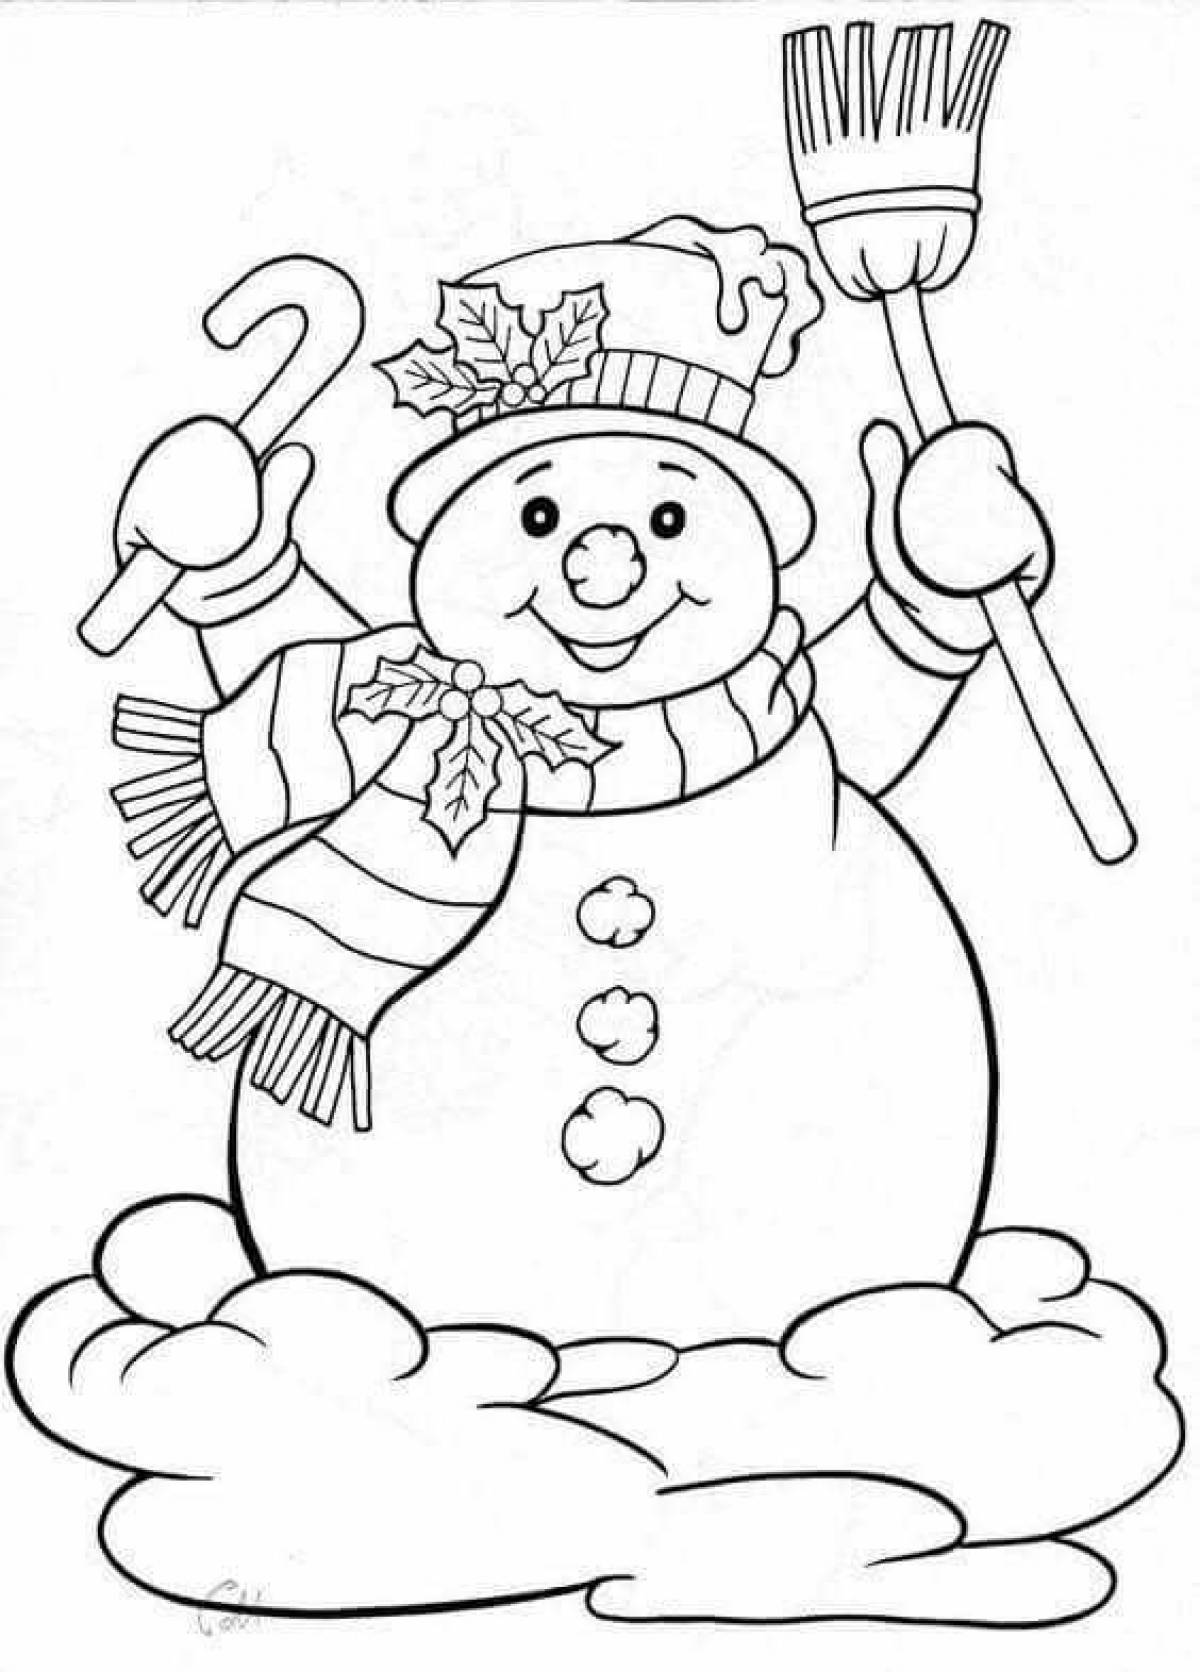 Snowman with candy